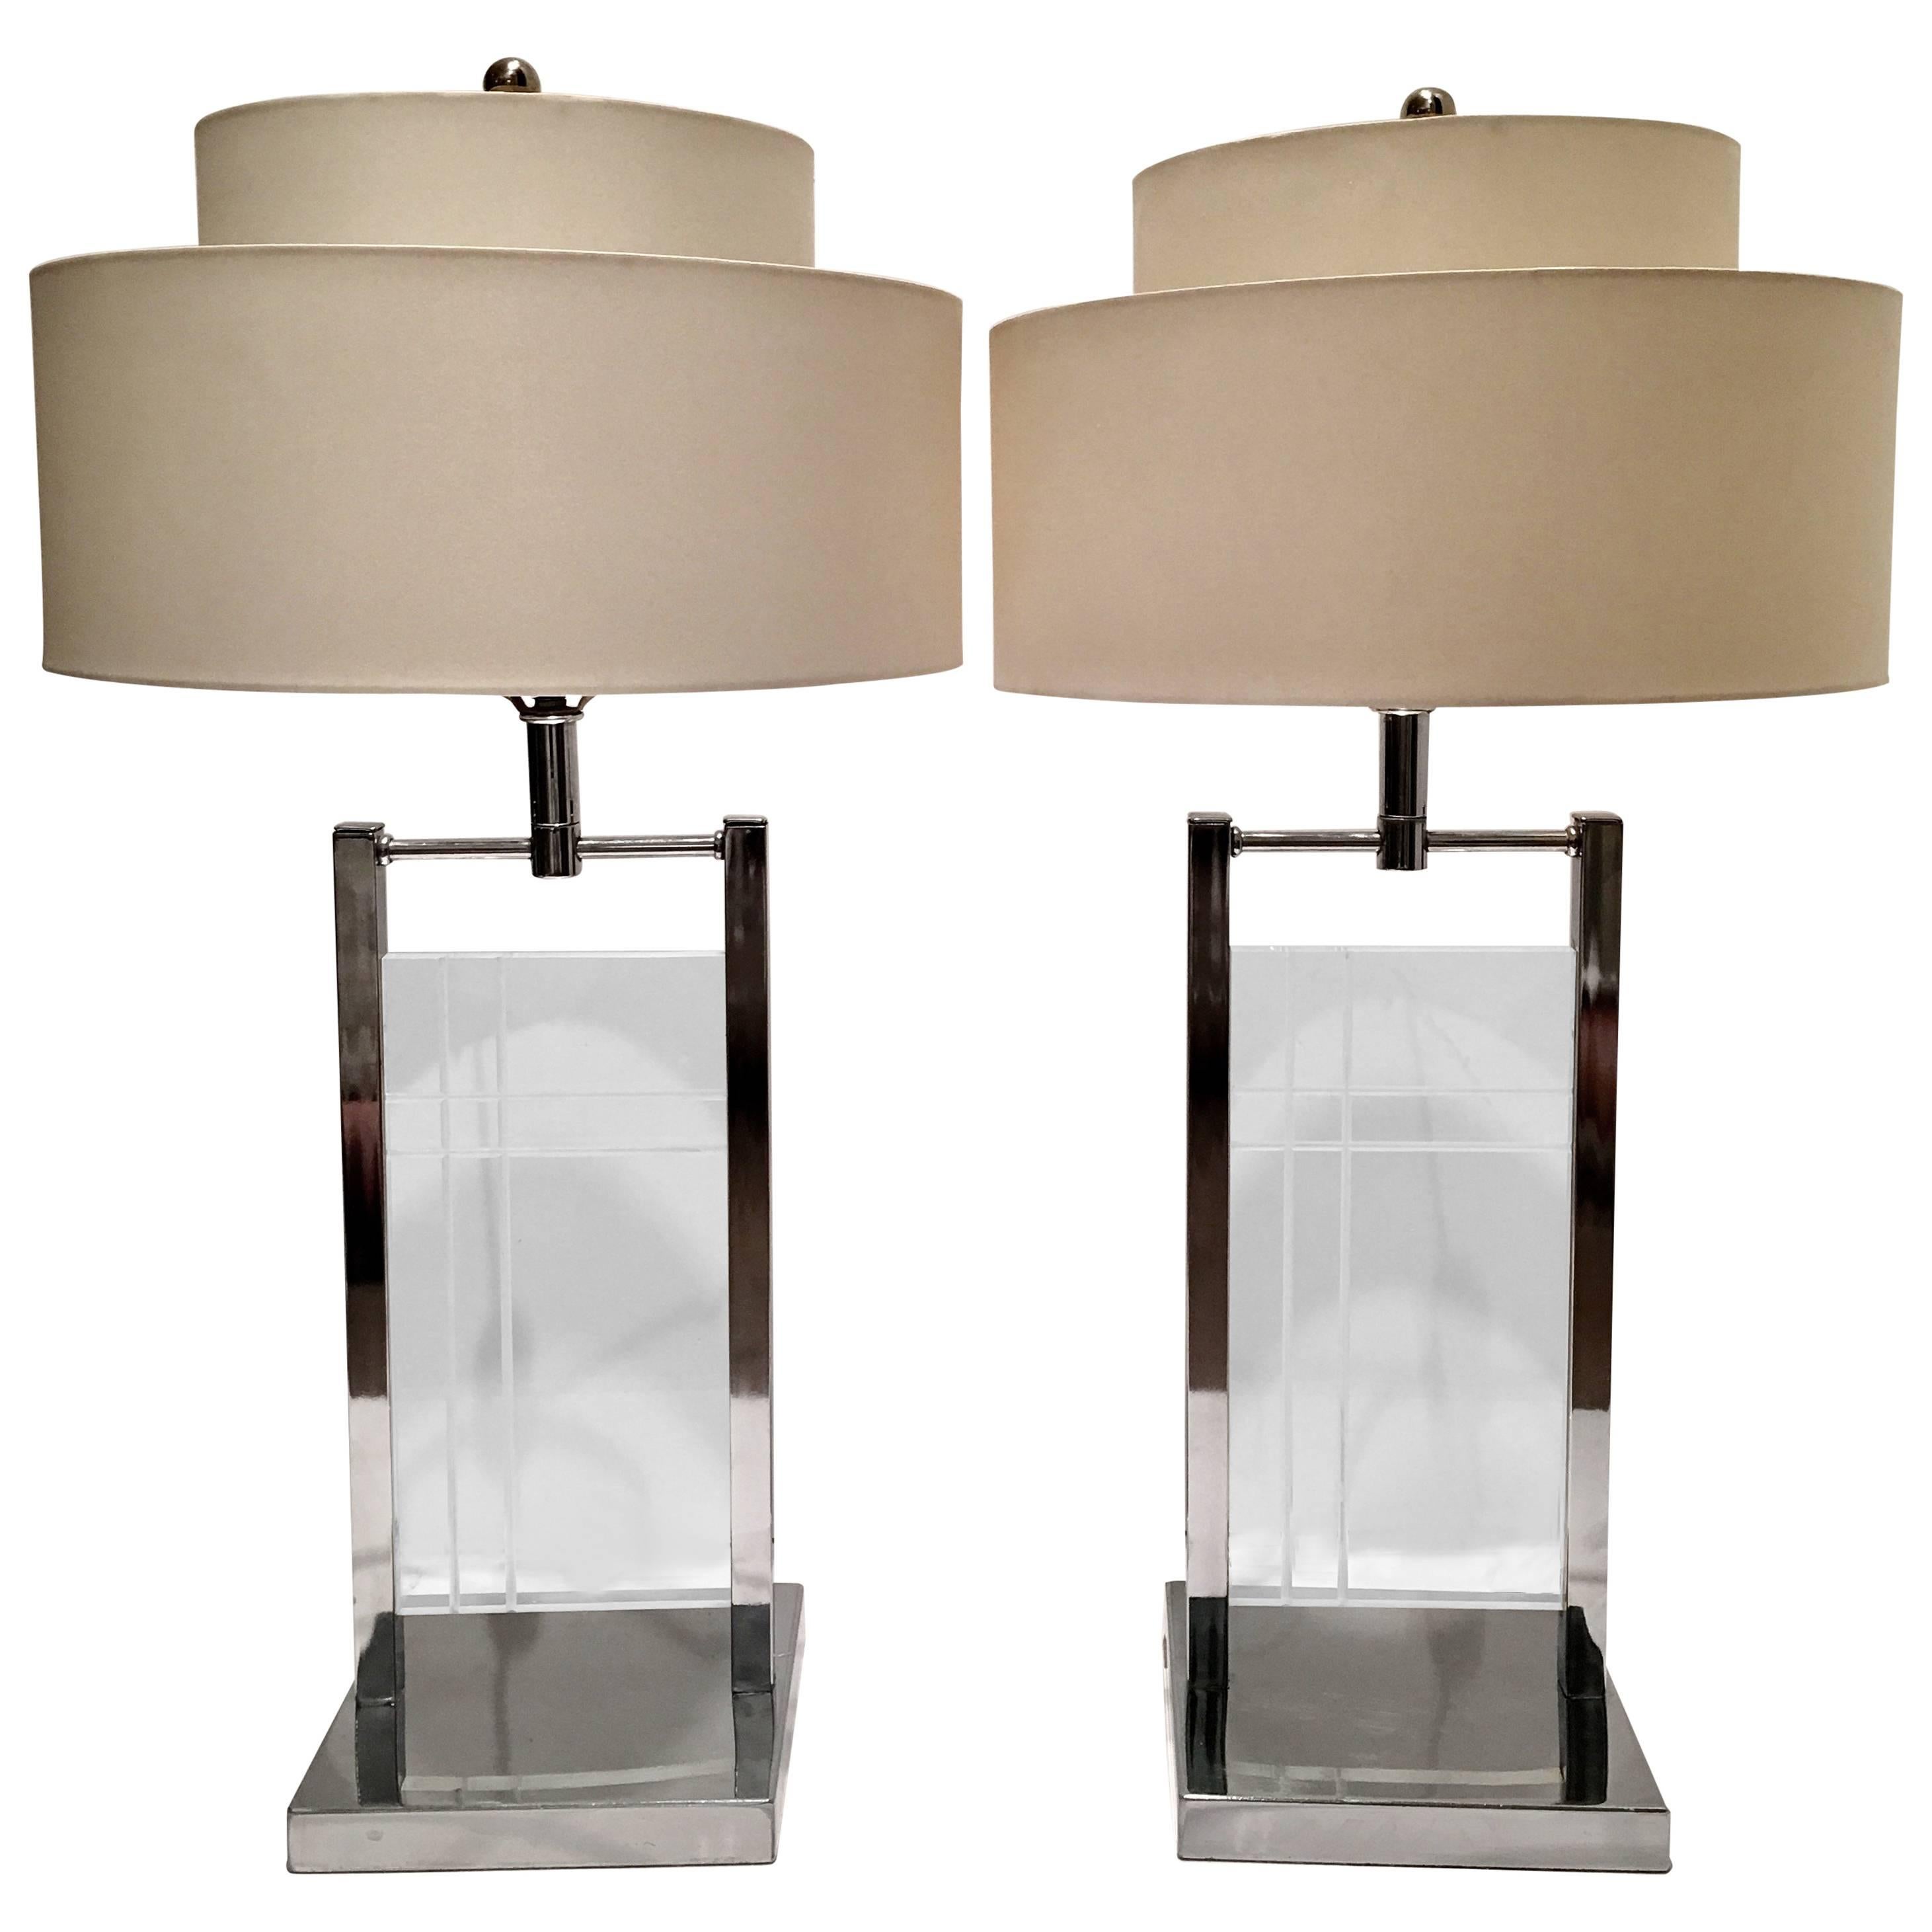 1970'S Pair Of Lucite & Chrome Table Lamps By, George Kovacs For Sale